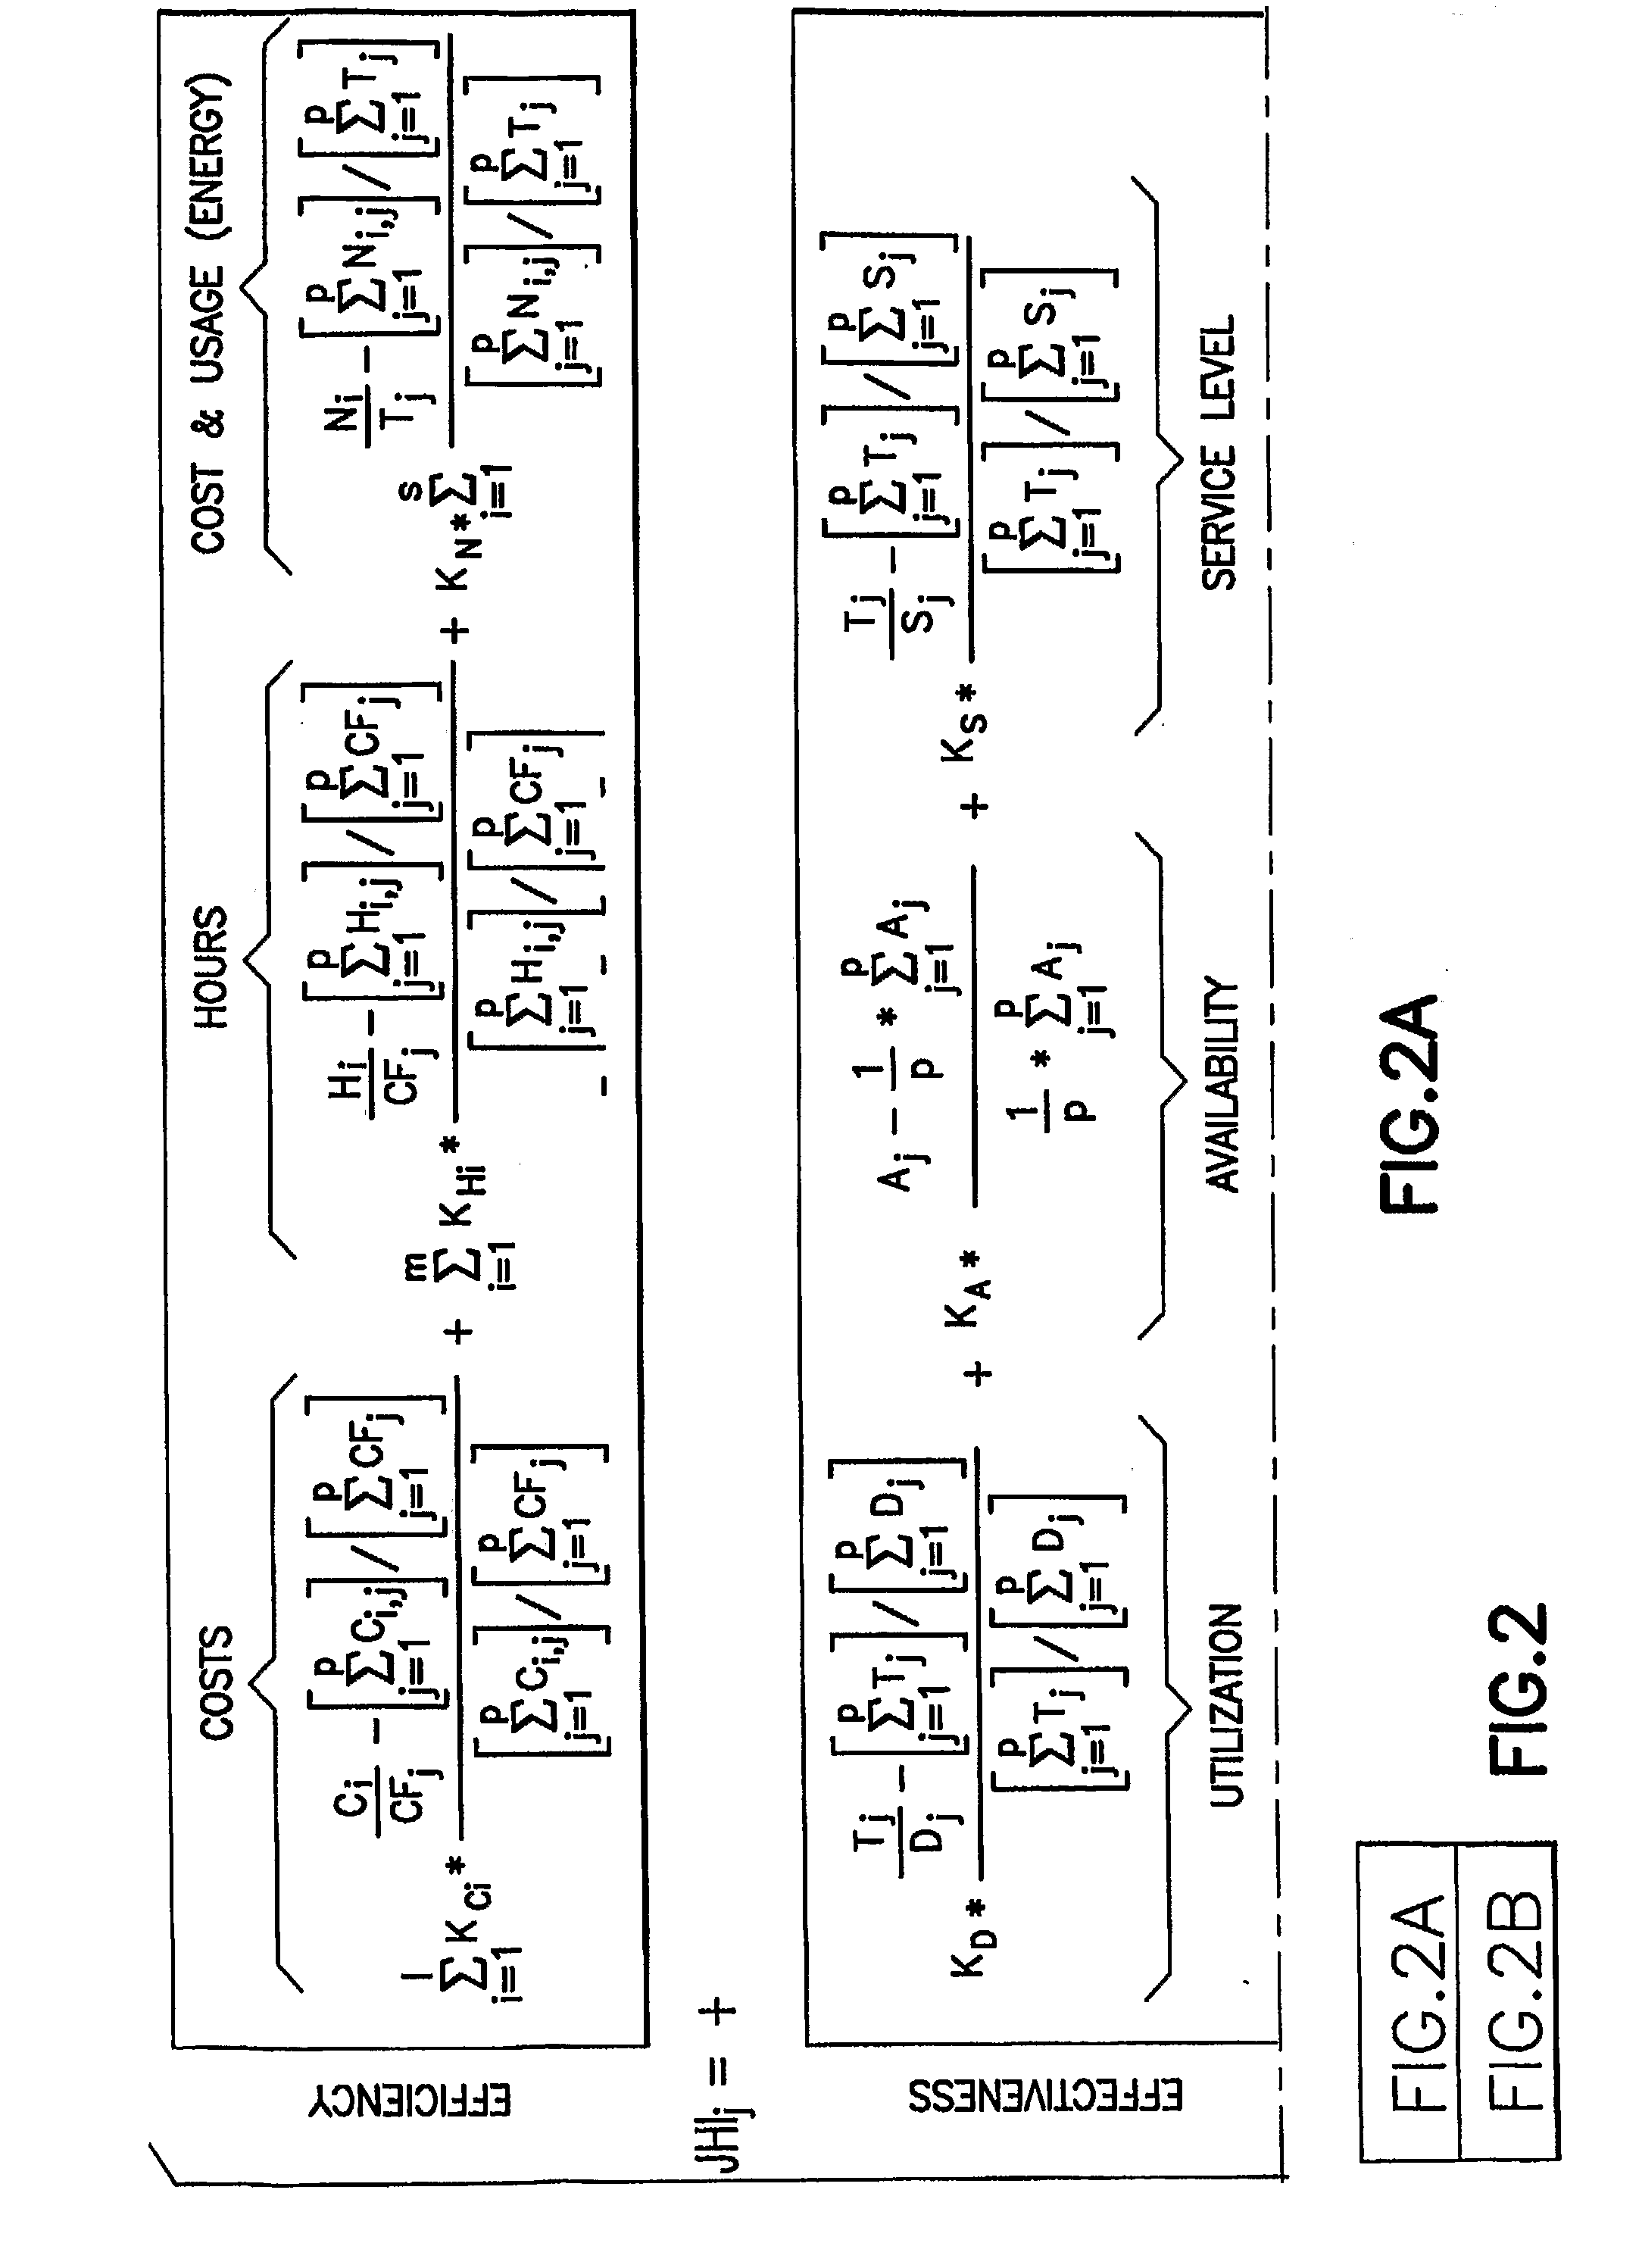 Method For Measuring The Overall Operational Performance Of Hydrocarbon Facilities